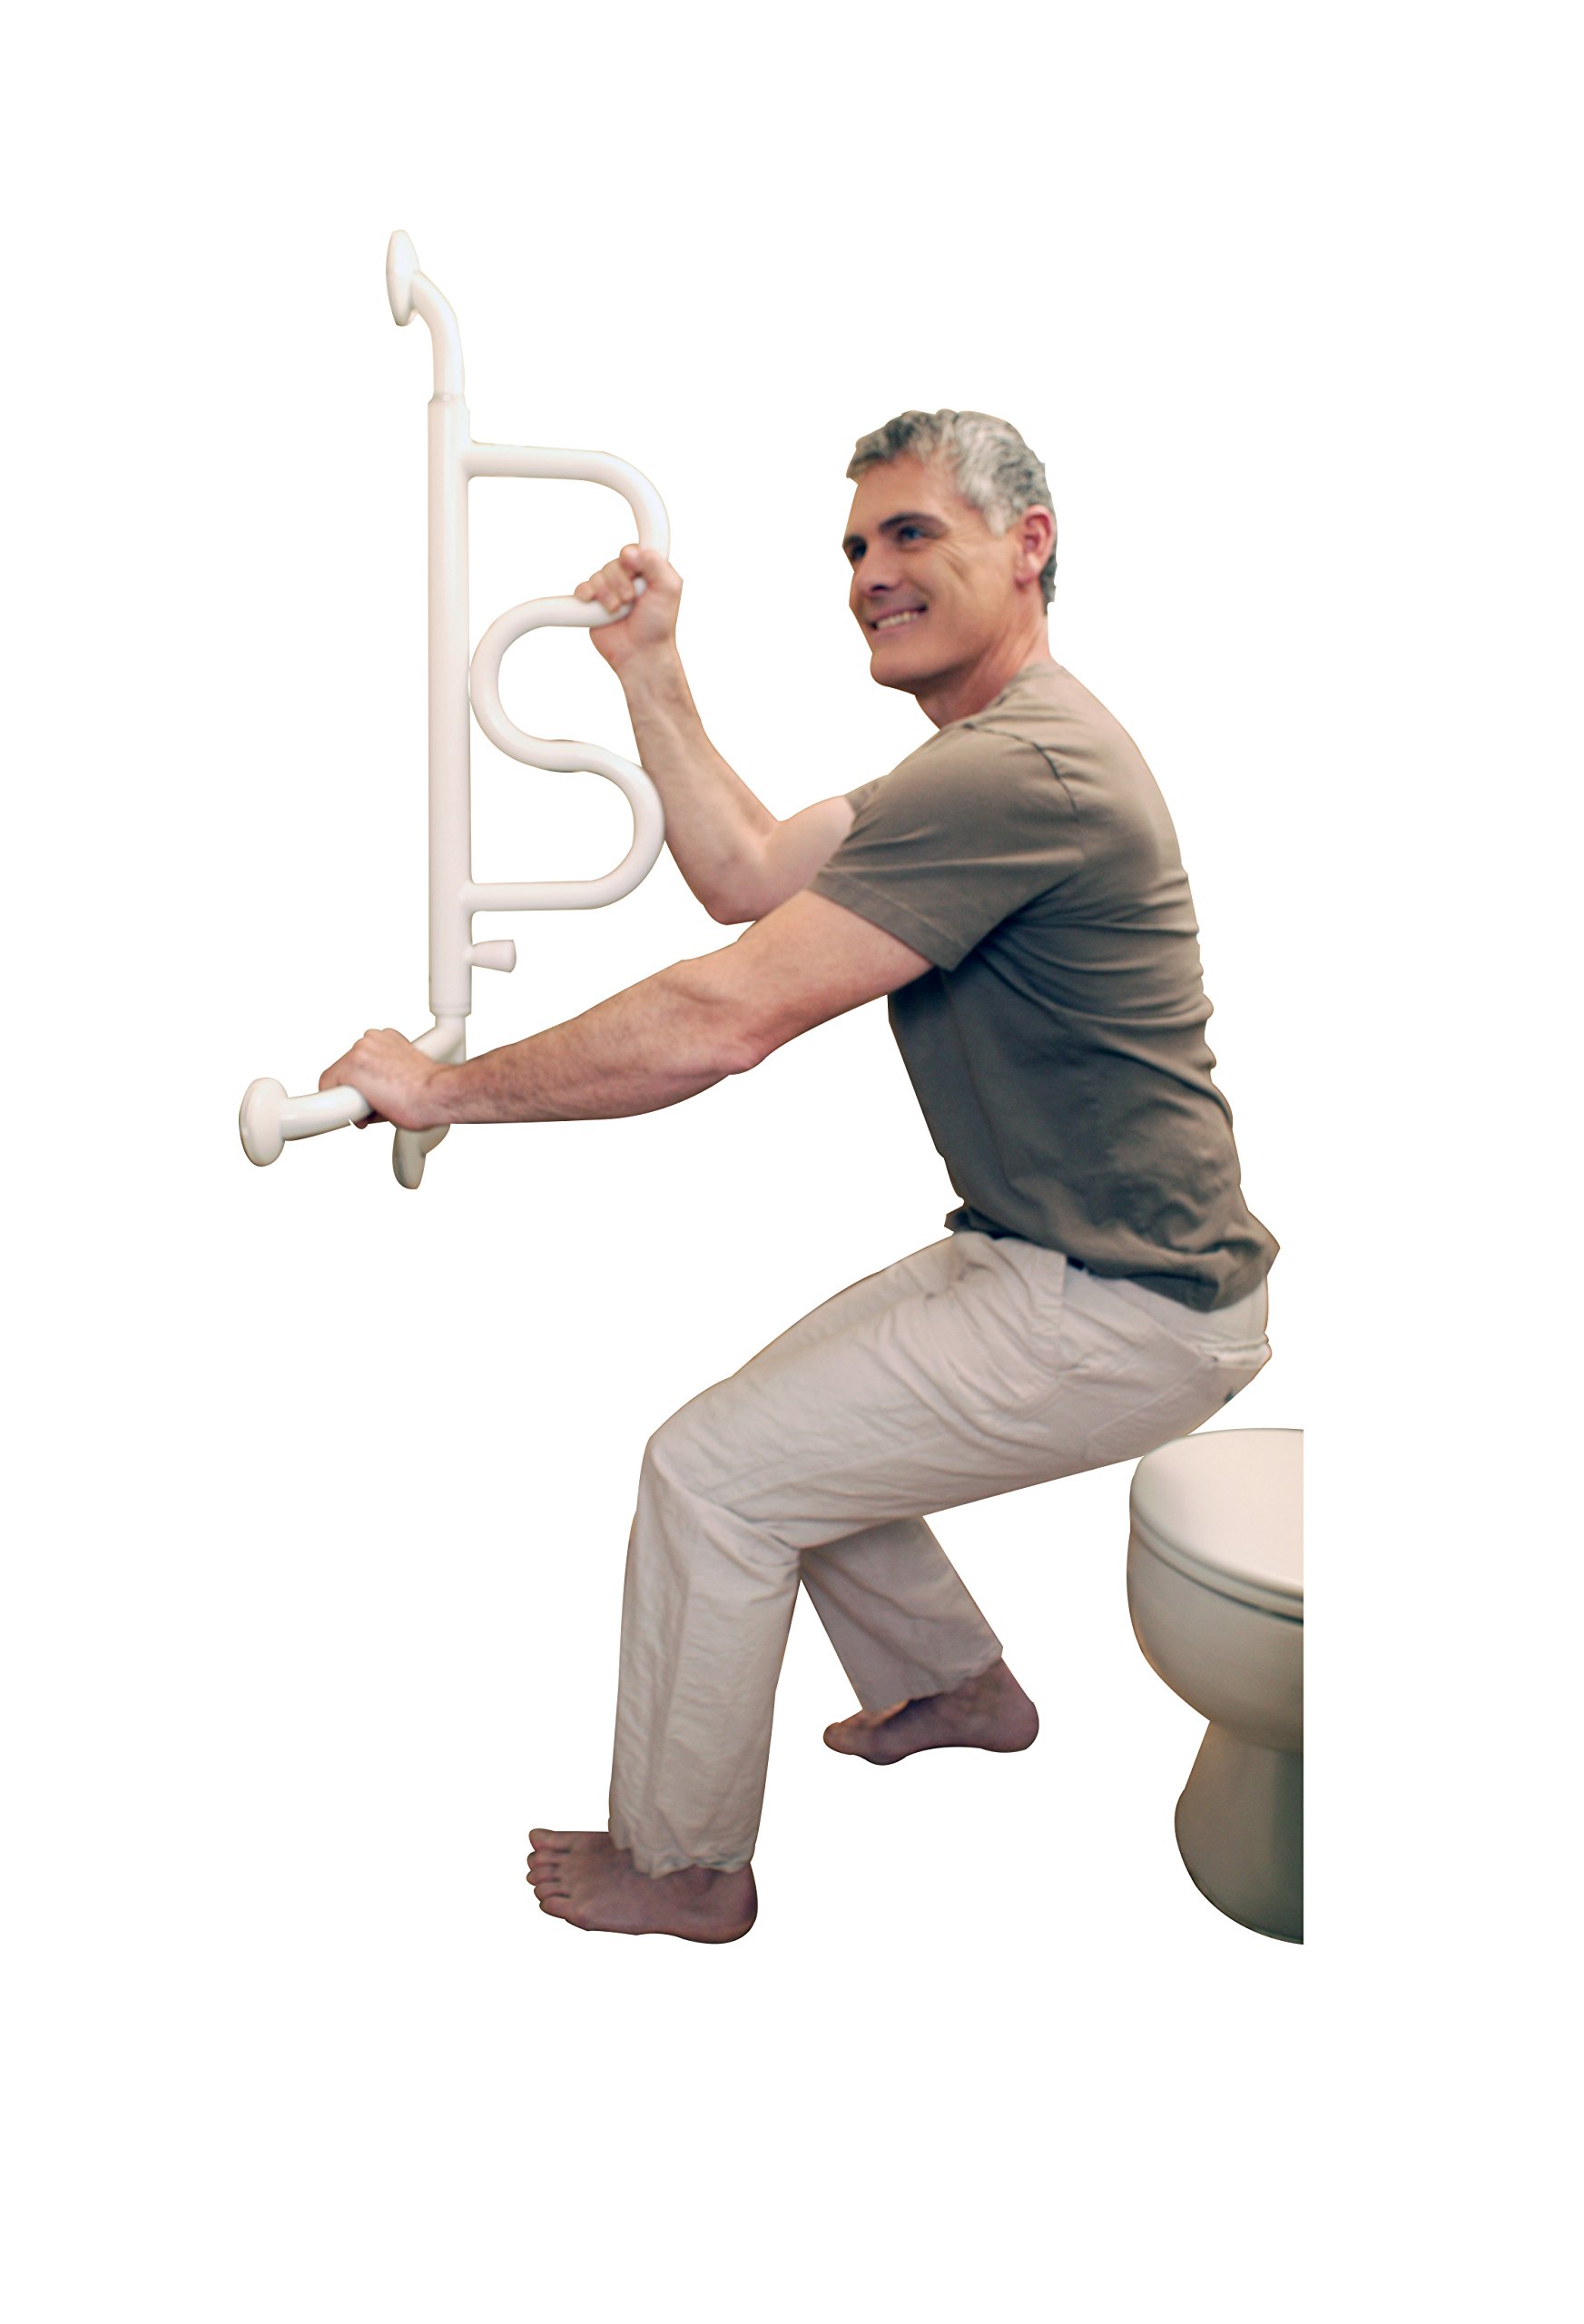 Stander Curve Grab Bar with Handrail, 14-Inch Bathroom Security Assist Bar for Toilet, Shower, and Bathtub Aid, Rotating Safety Handle, Wall Mounted Swing Grab Bar for Adults, Seniors, and Elderly